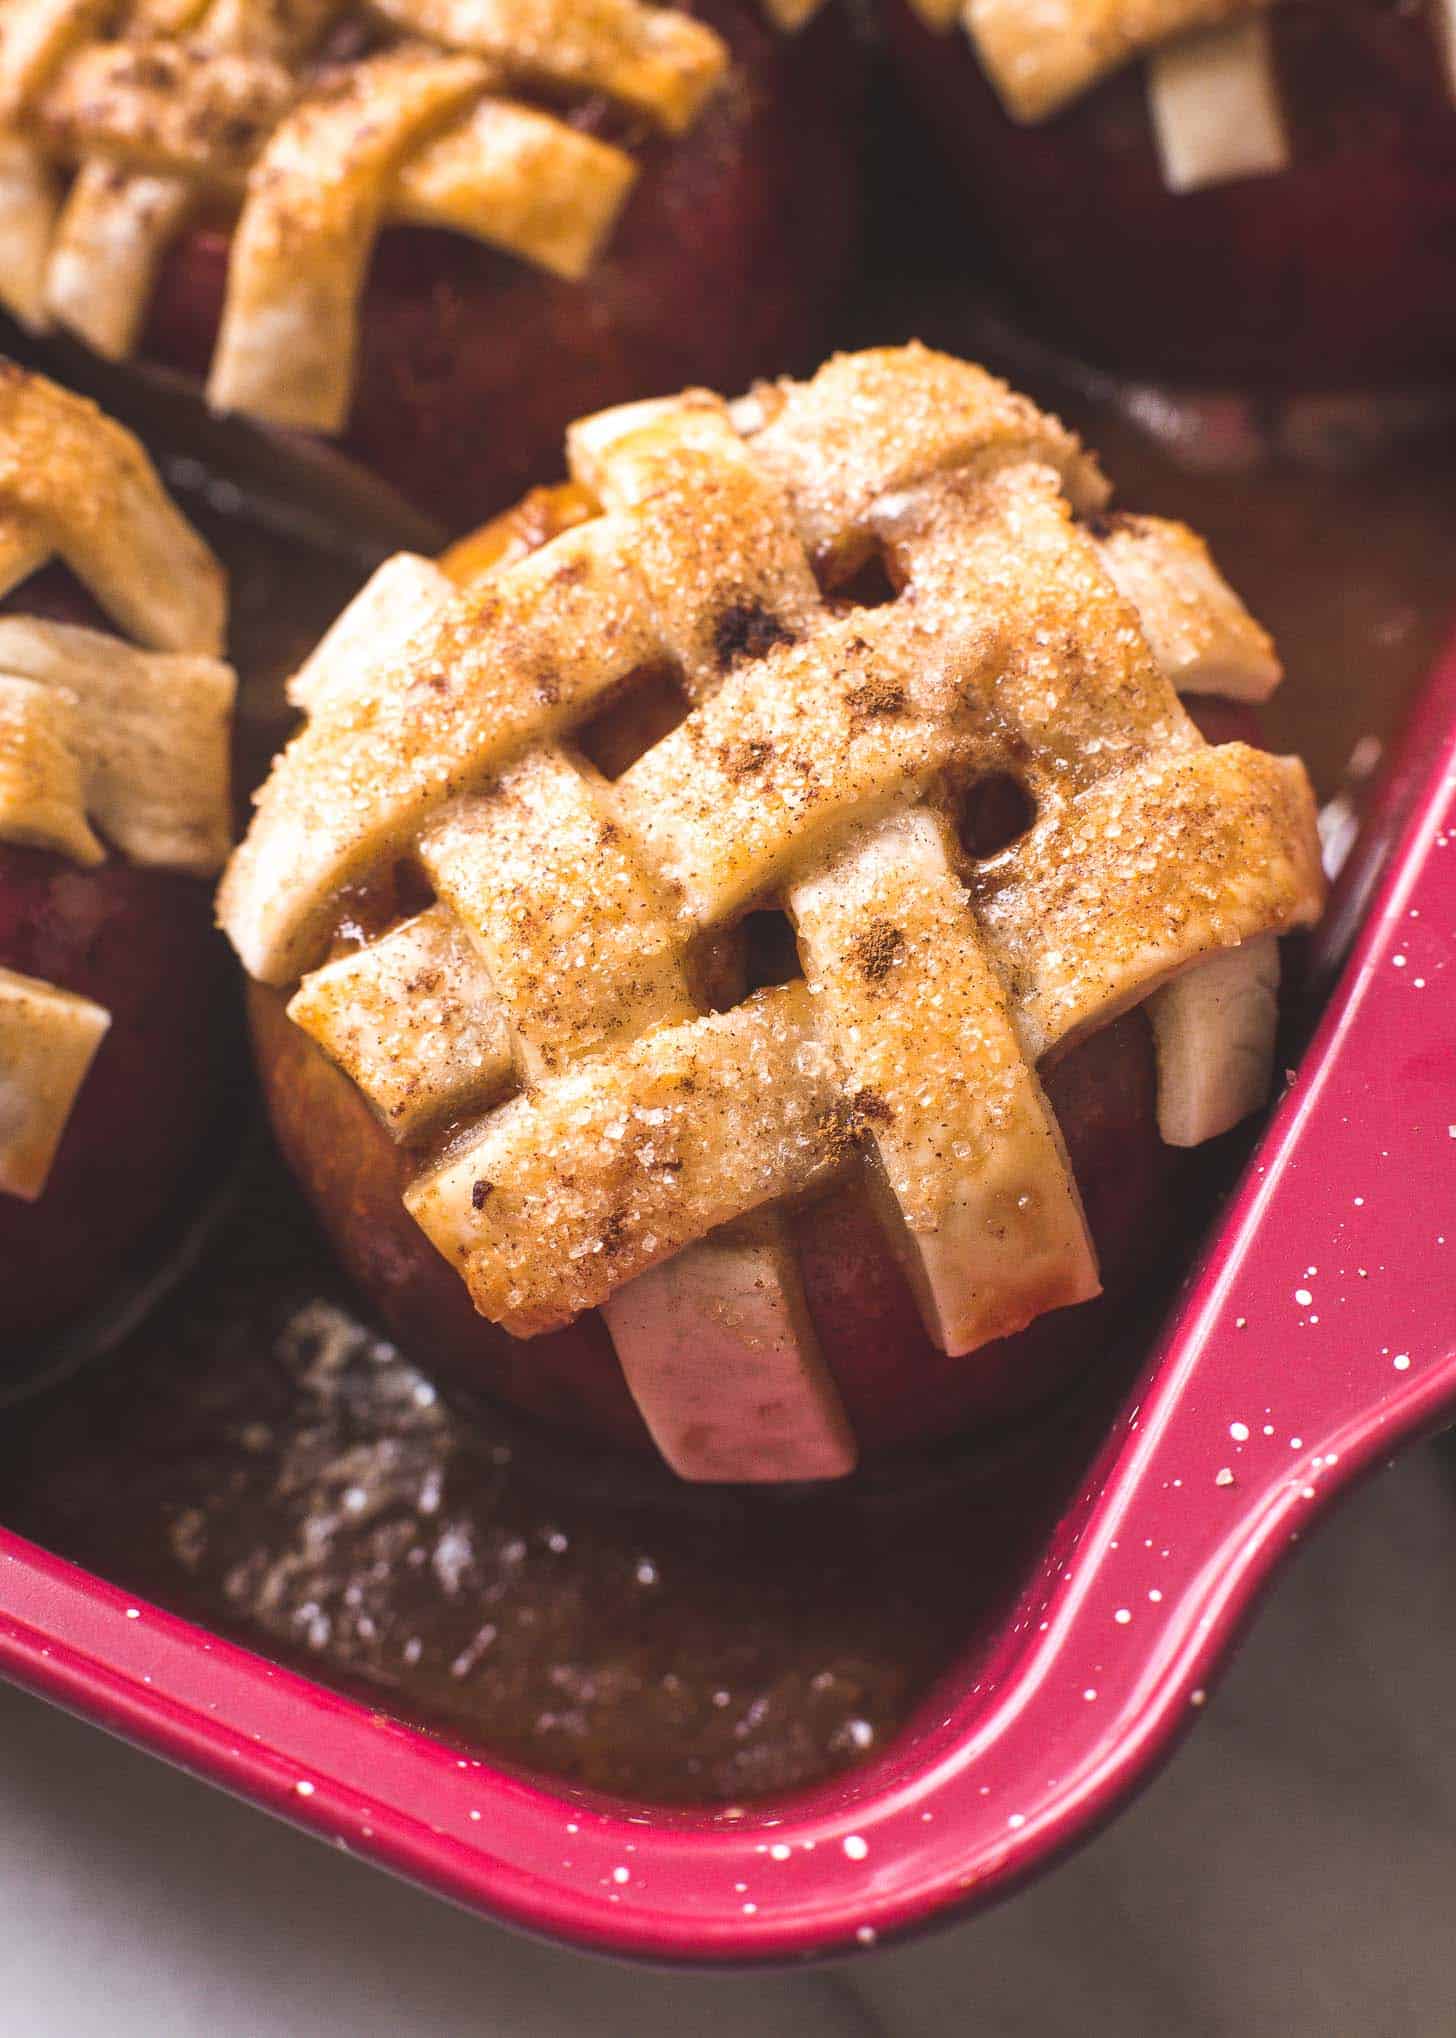 Baked Apples in a red baking dish